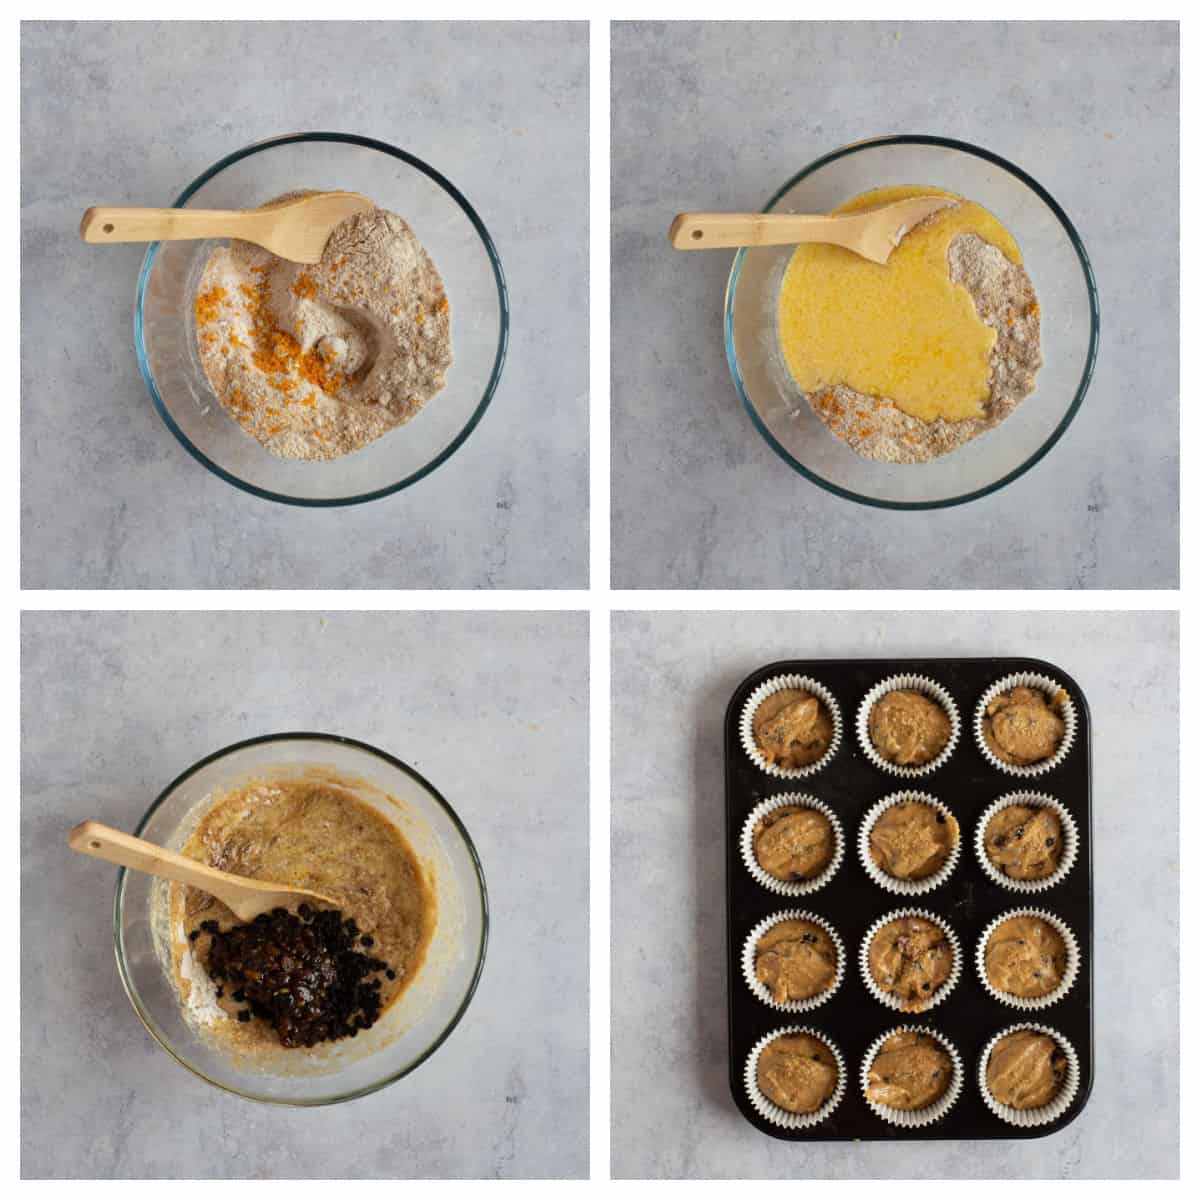 Step by step process photos for making Christmas muffins.